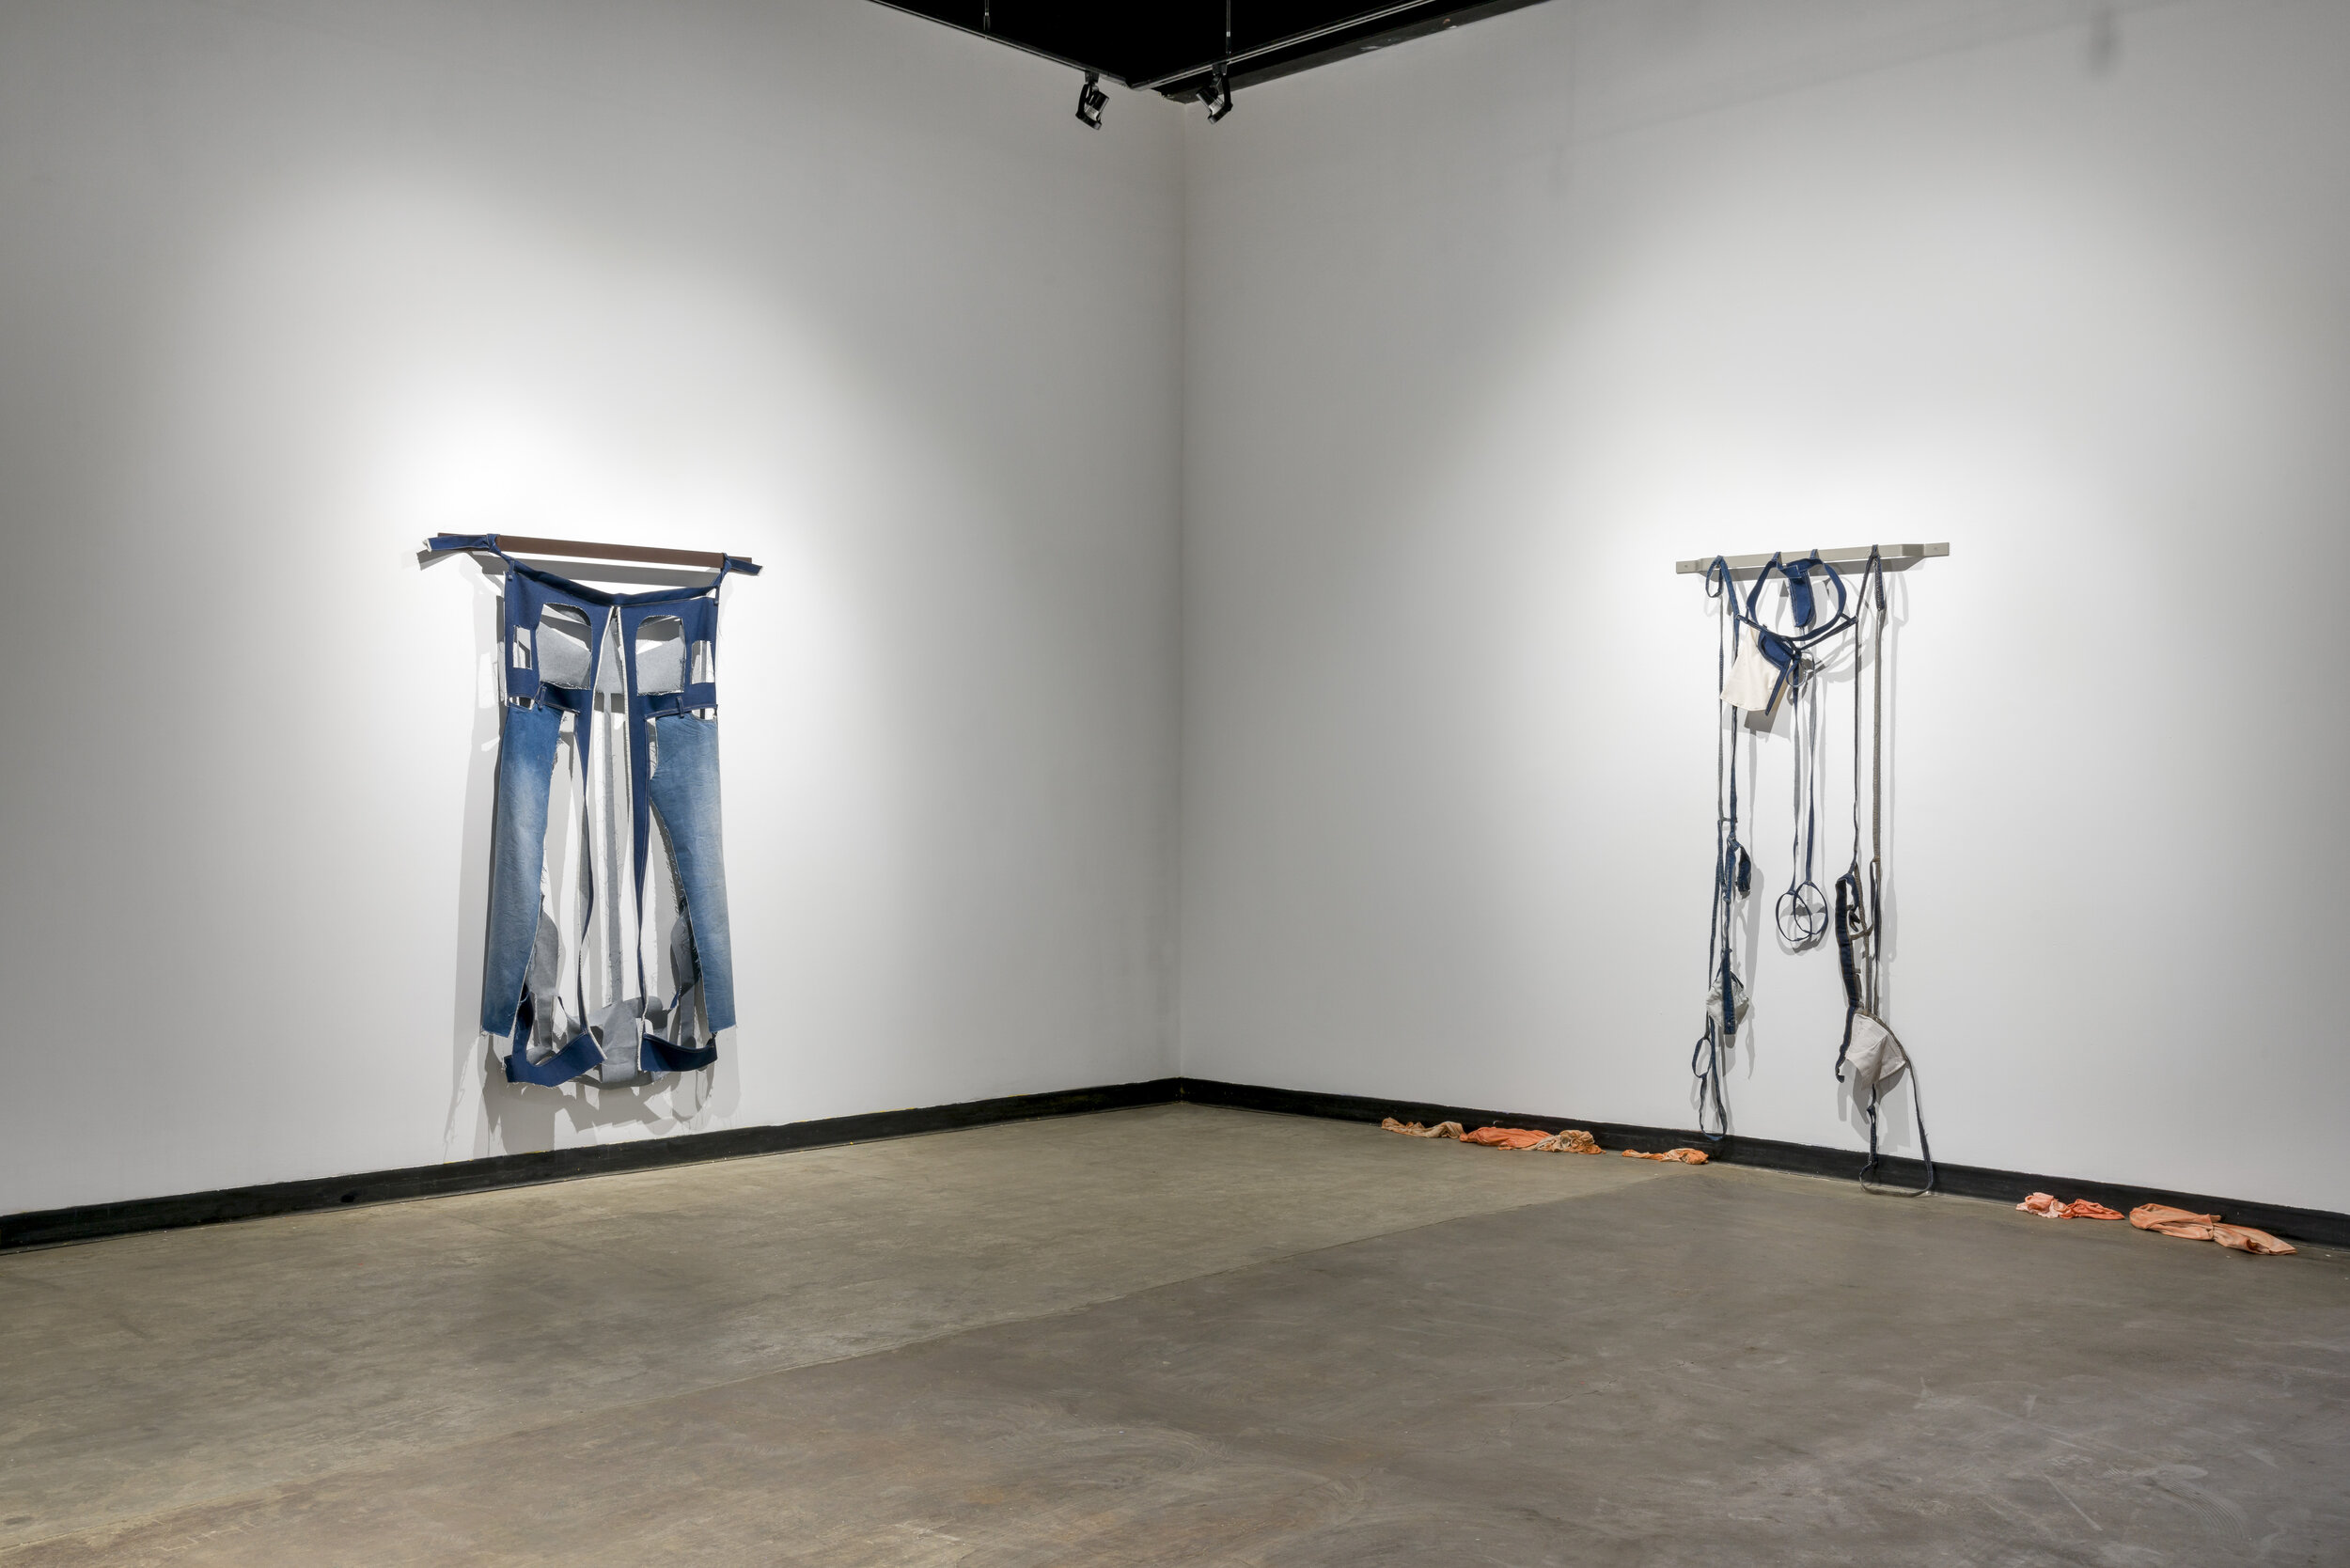  A look at two pieces as they hang on two walls that meet in a corner. The piece on the left wall looks similar to a pair of blue jeans, if you had cut out the back pockets, creating square holes in the denim. The piece on the right is primarily long